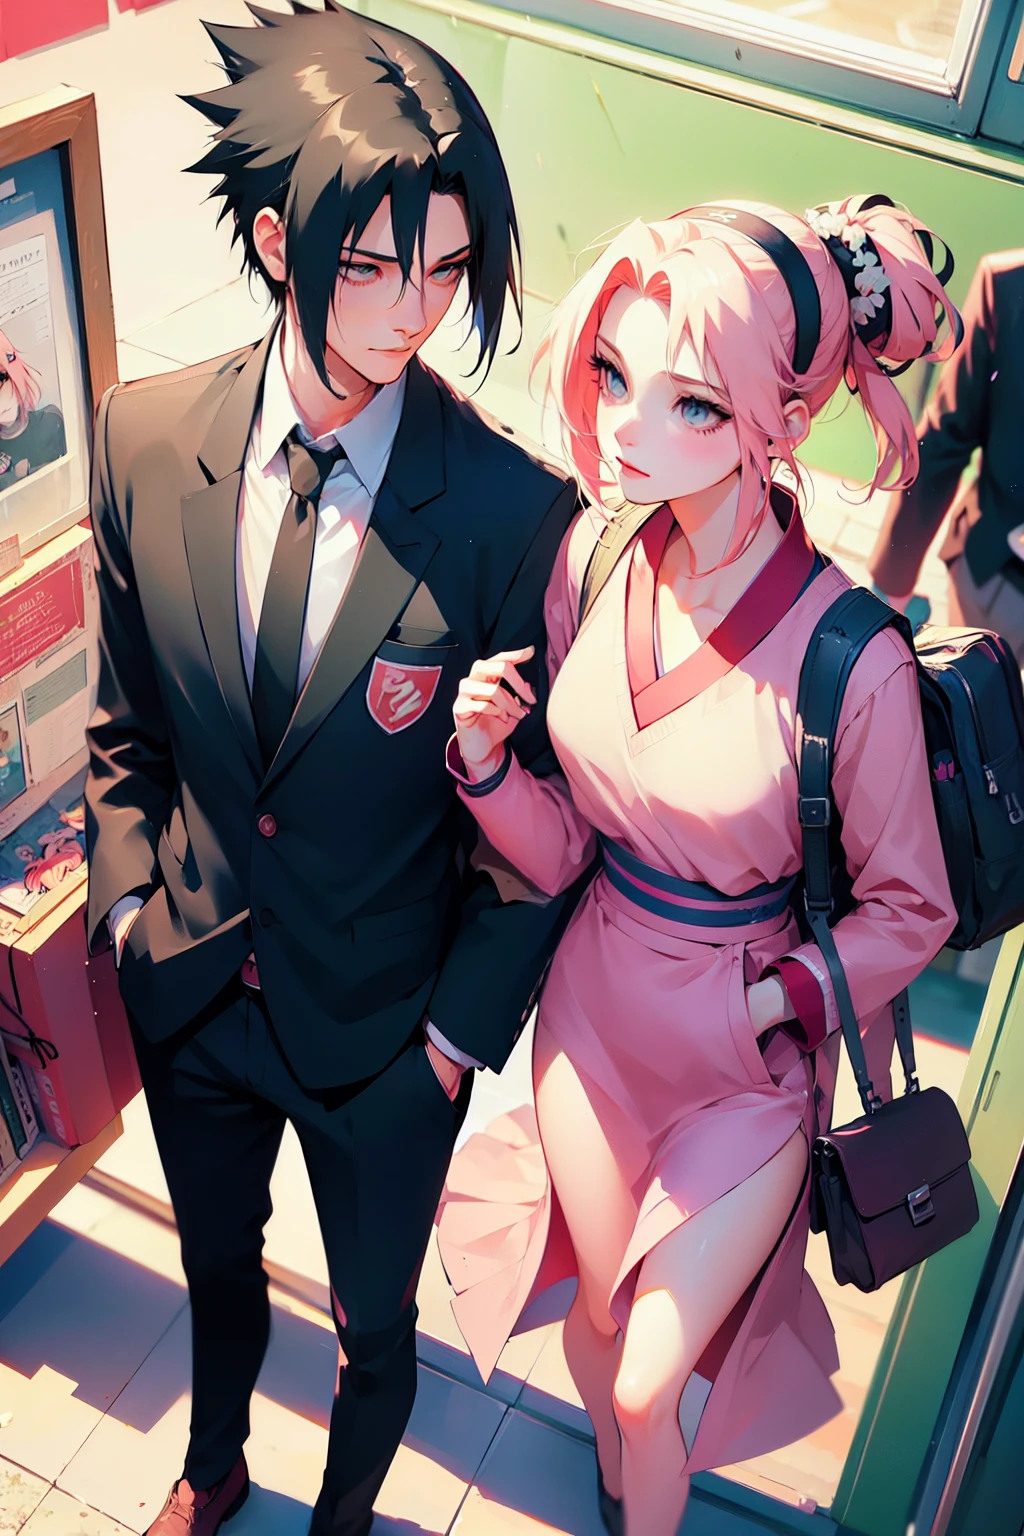 sasusaku. Sasuke Uchiha, a tall, black-haired man wearing a Quarterback football uniform, is a student, with his hands in his pockets. Sakura, a thin woman with pink hair, cheerleader. best quality, adorable, ultra-detailed, illustration, complex, detailed, extremely detailed, detailed face, soft light, soft focus, perfect face. In love, illustration. two people, couple, ILUSTRATION ART